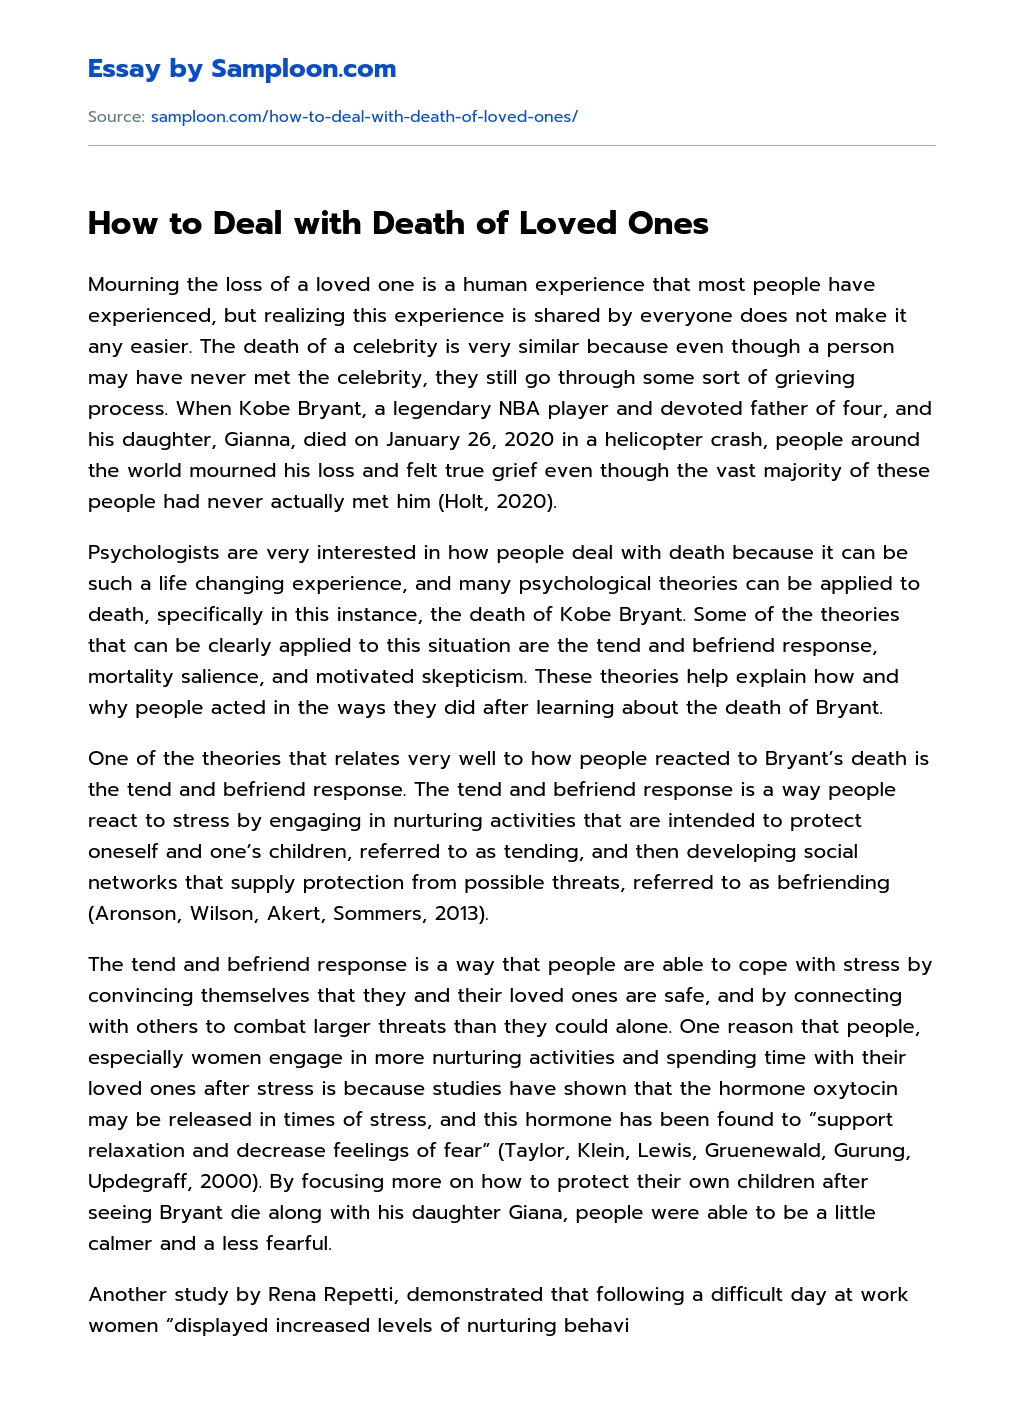 How to Deal with Death of Loved Ones essay